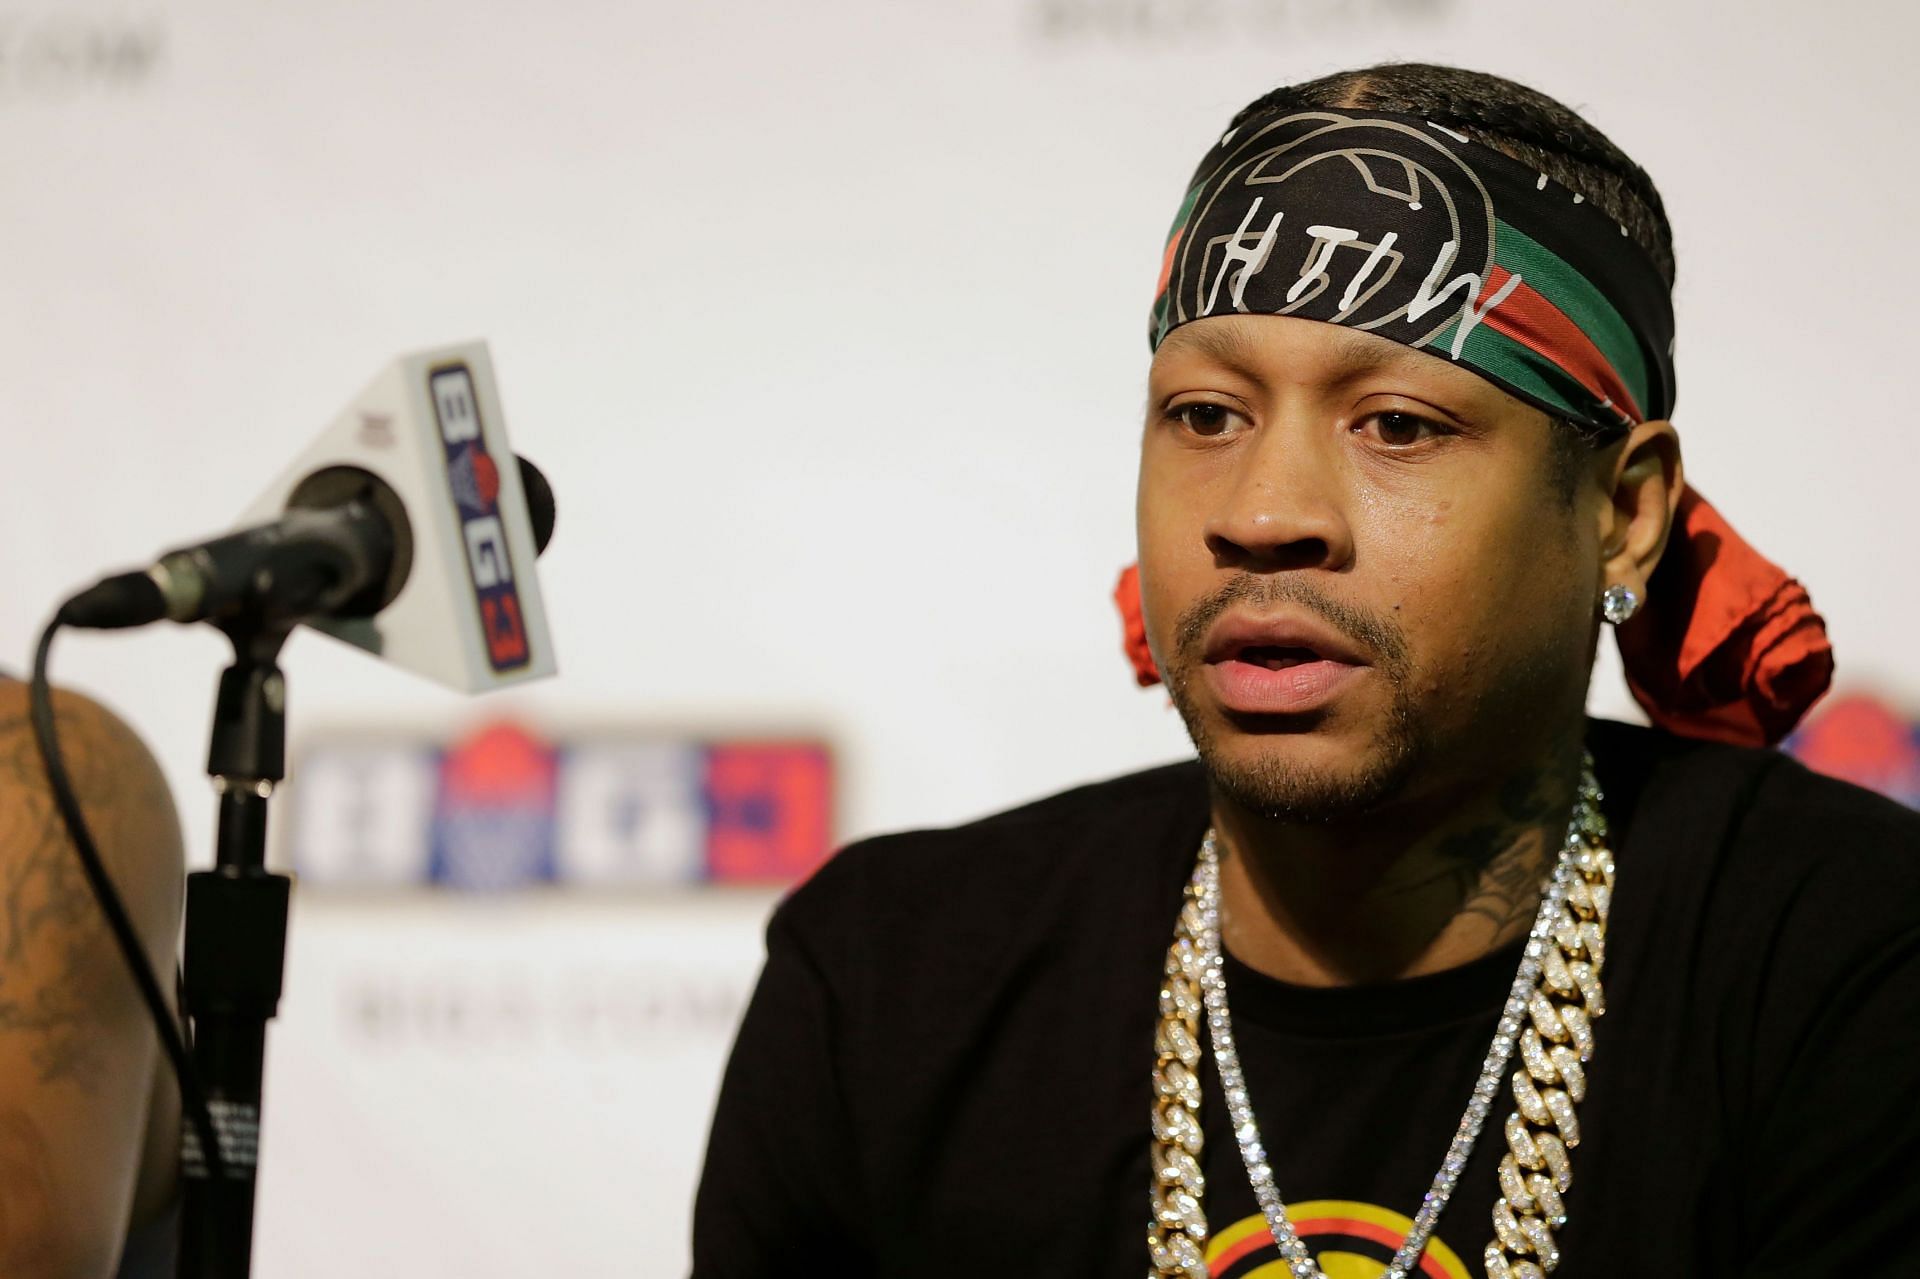 Iverson filed for bankruptcy in 2012 (Image via Getty Images)